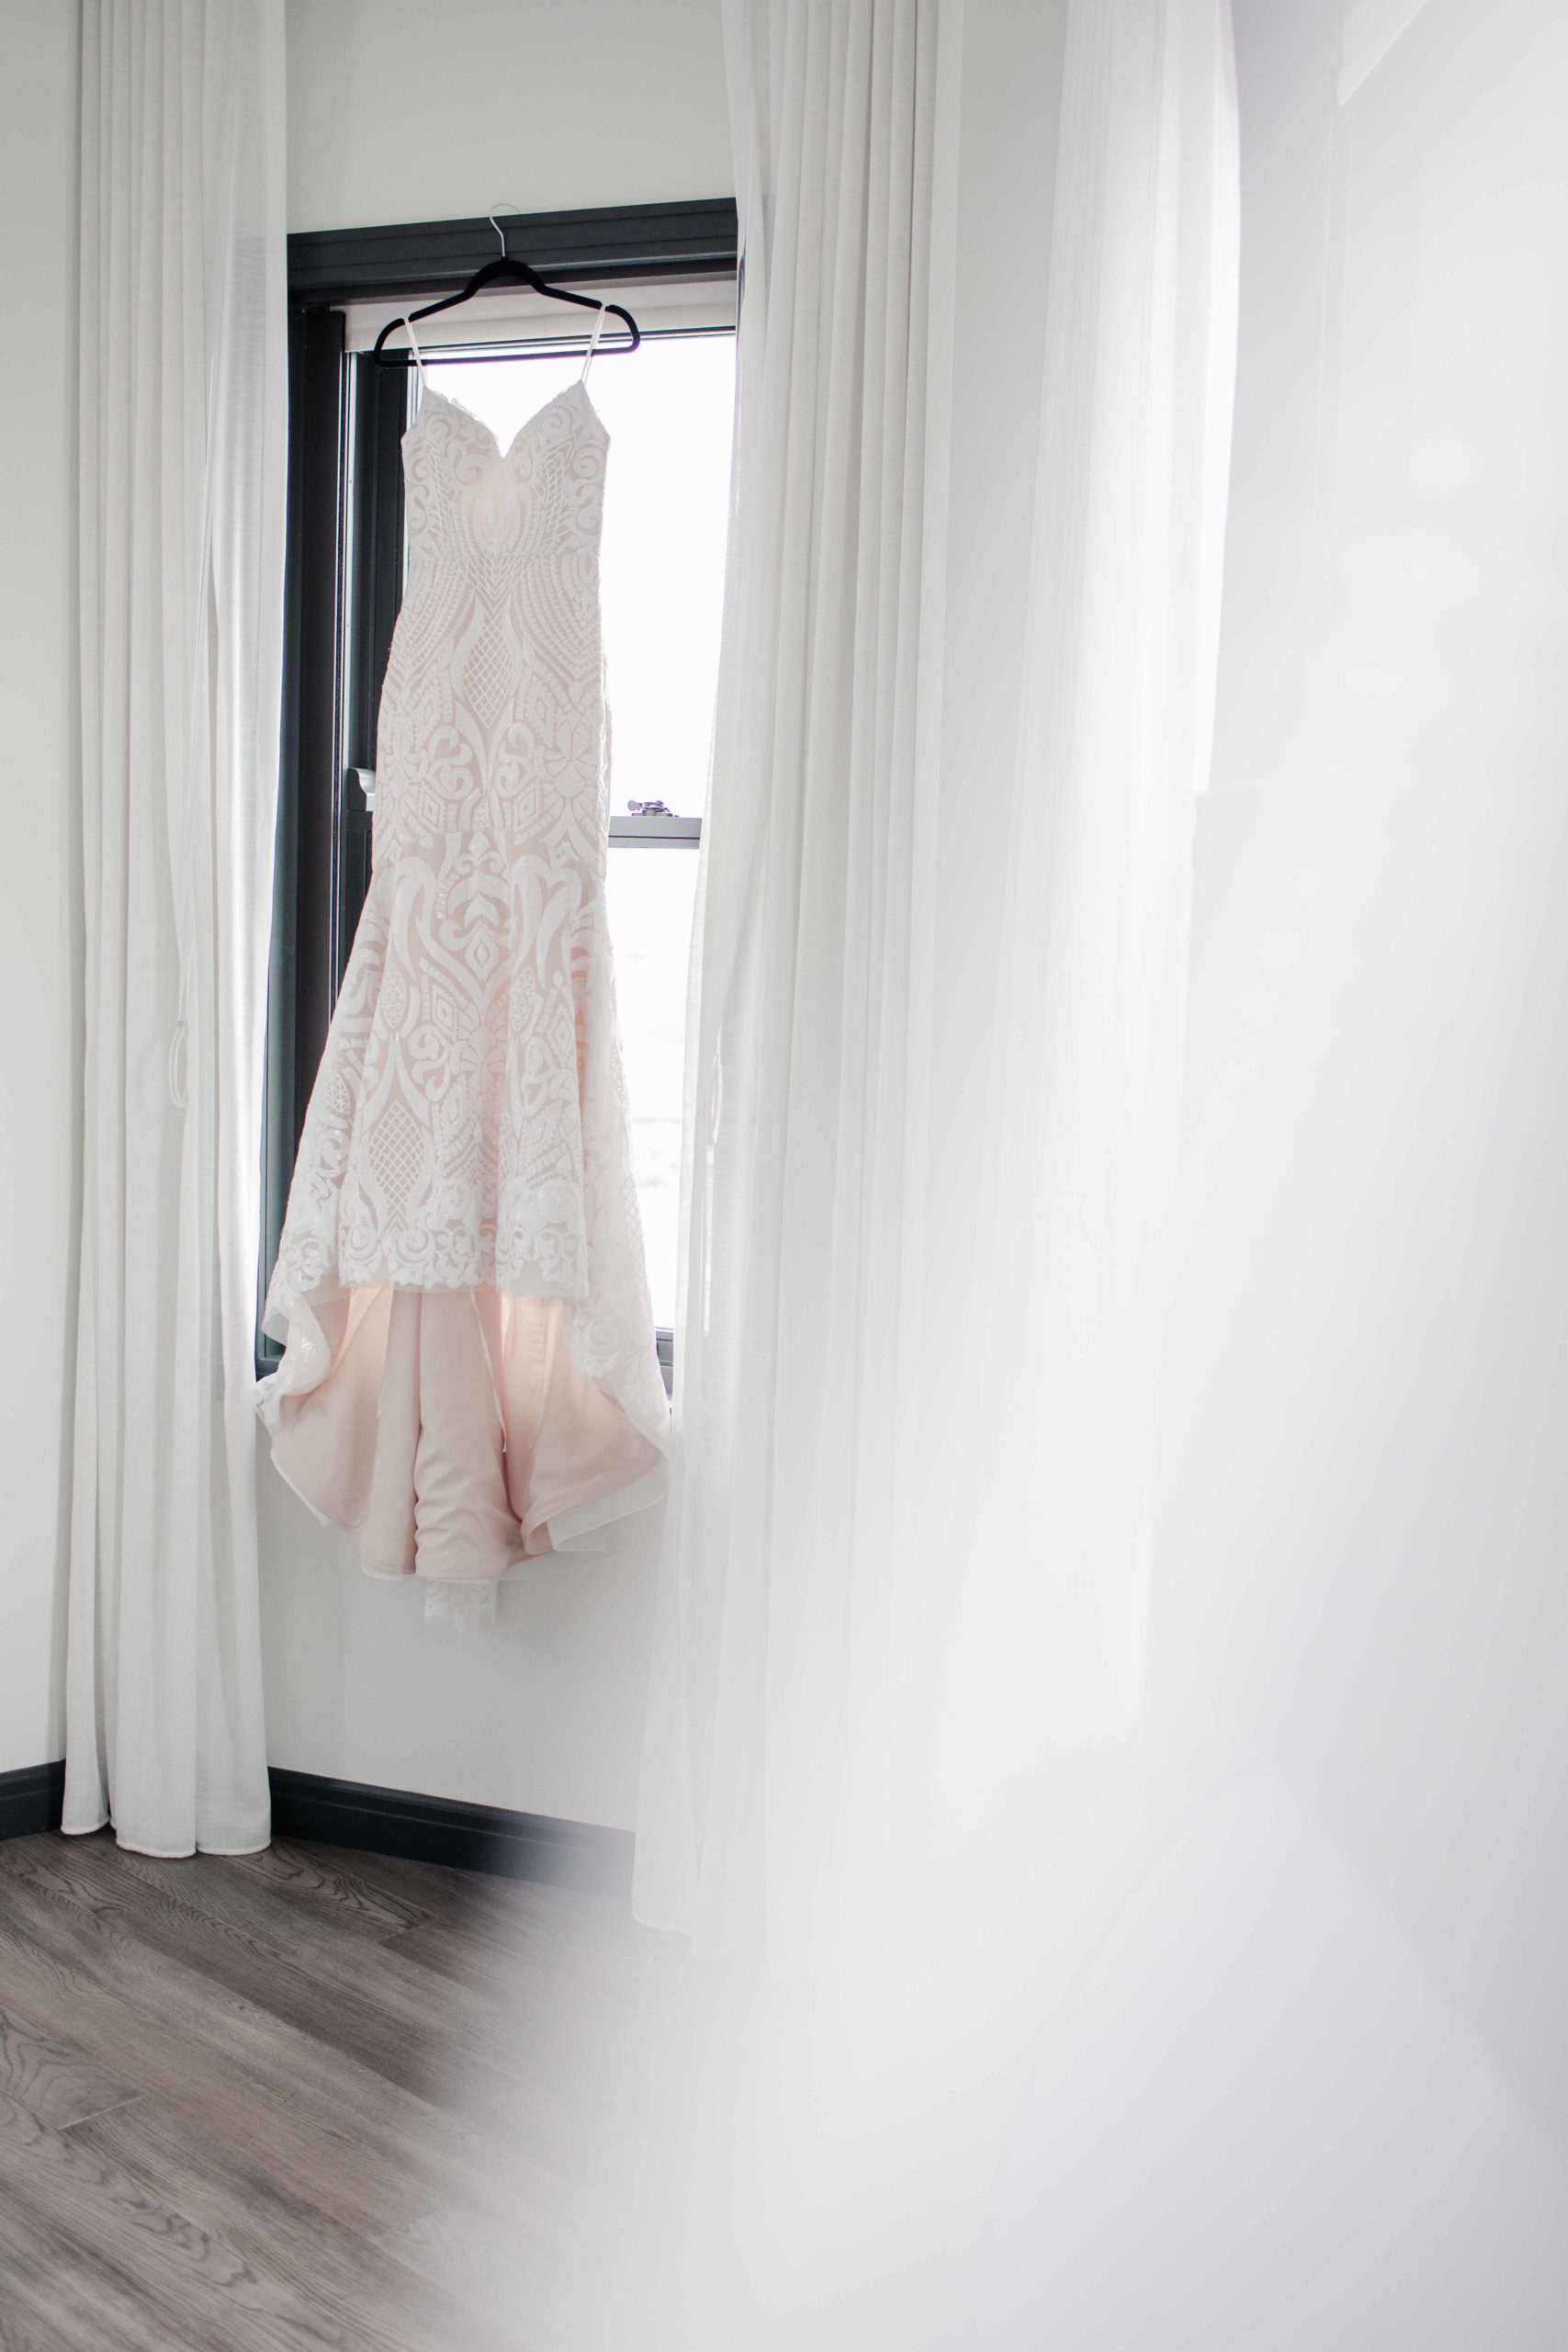 Chicago Illinois Wedding Photography Dress Hanging in The Robey Hotel